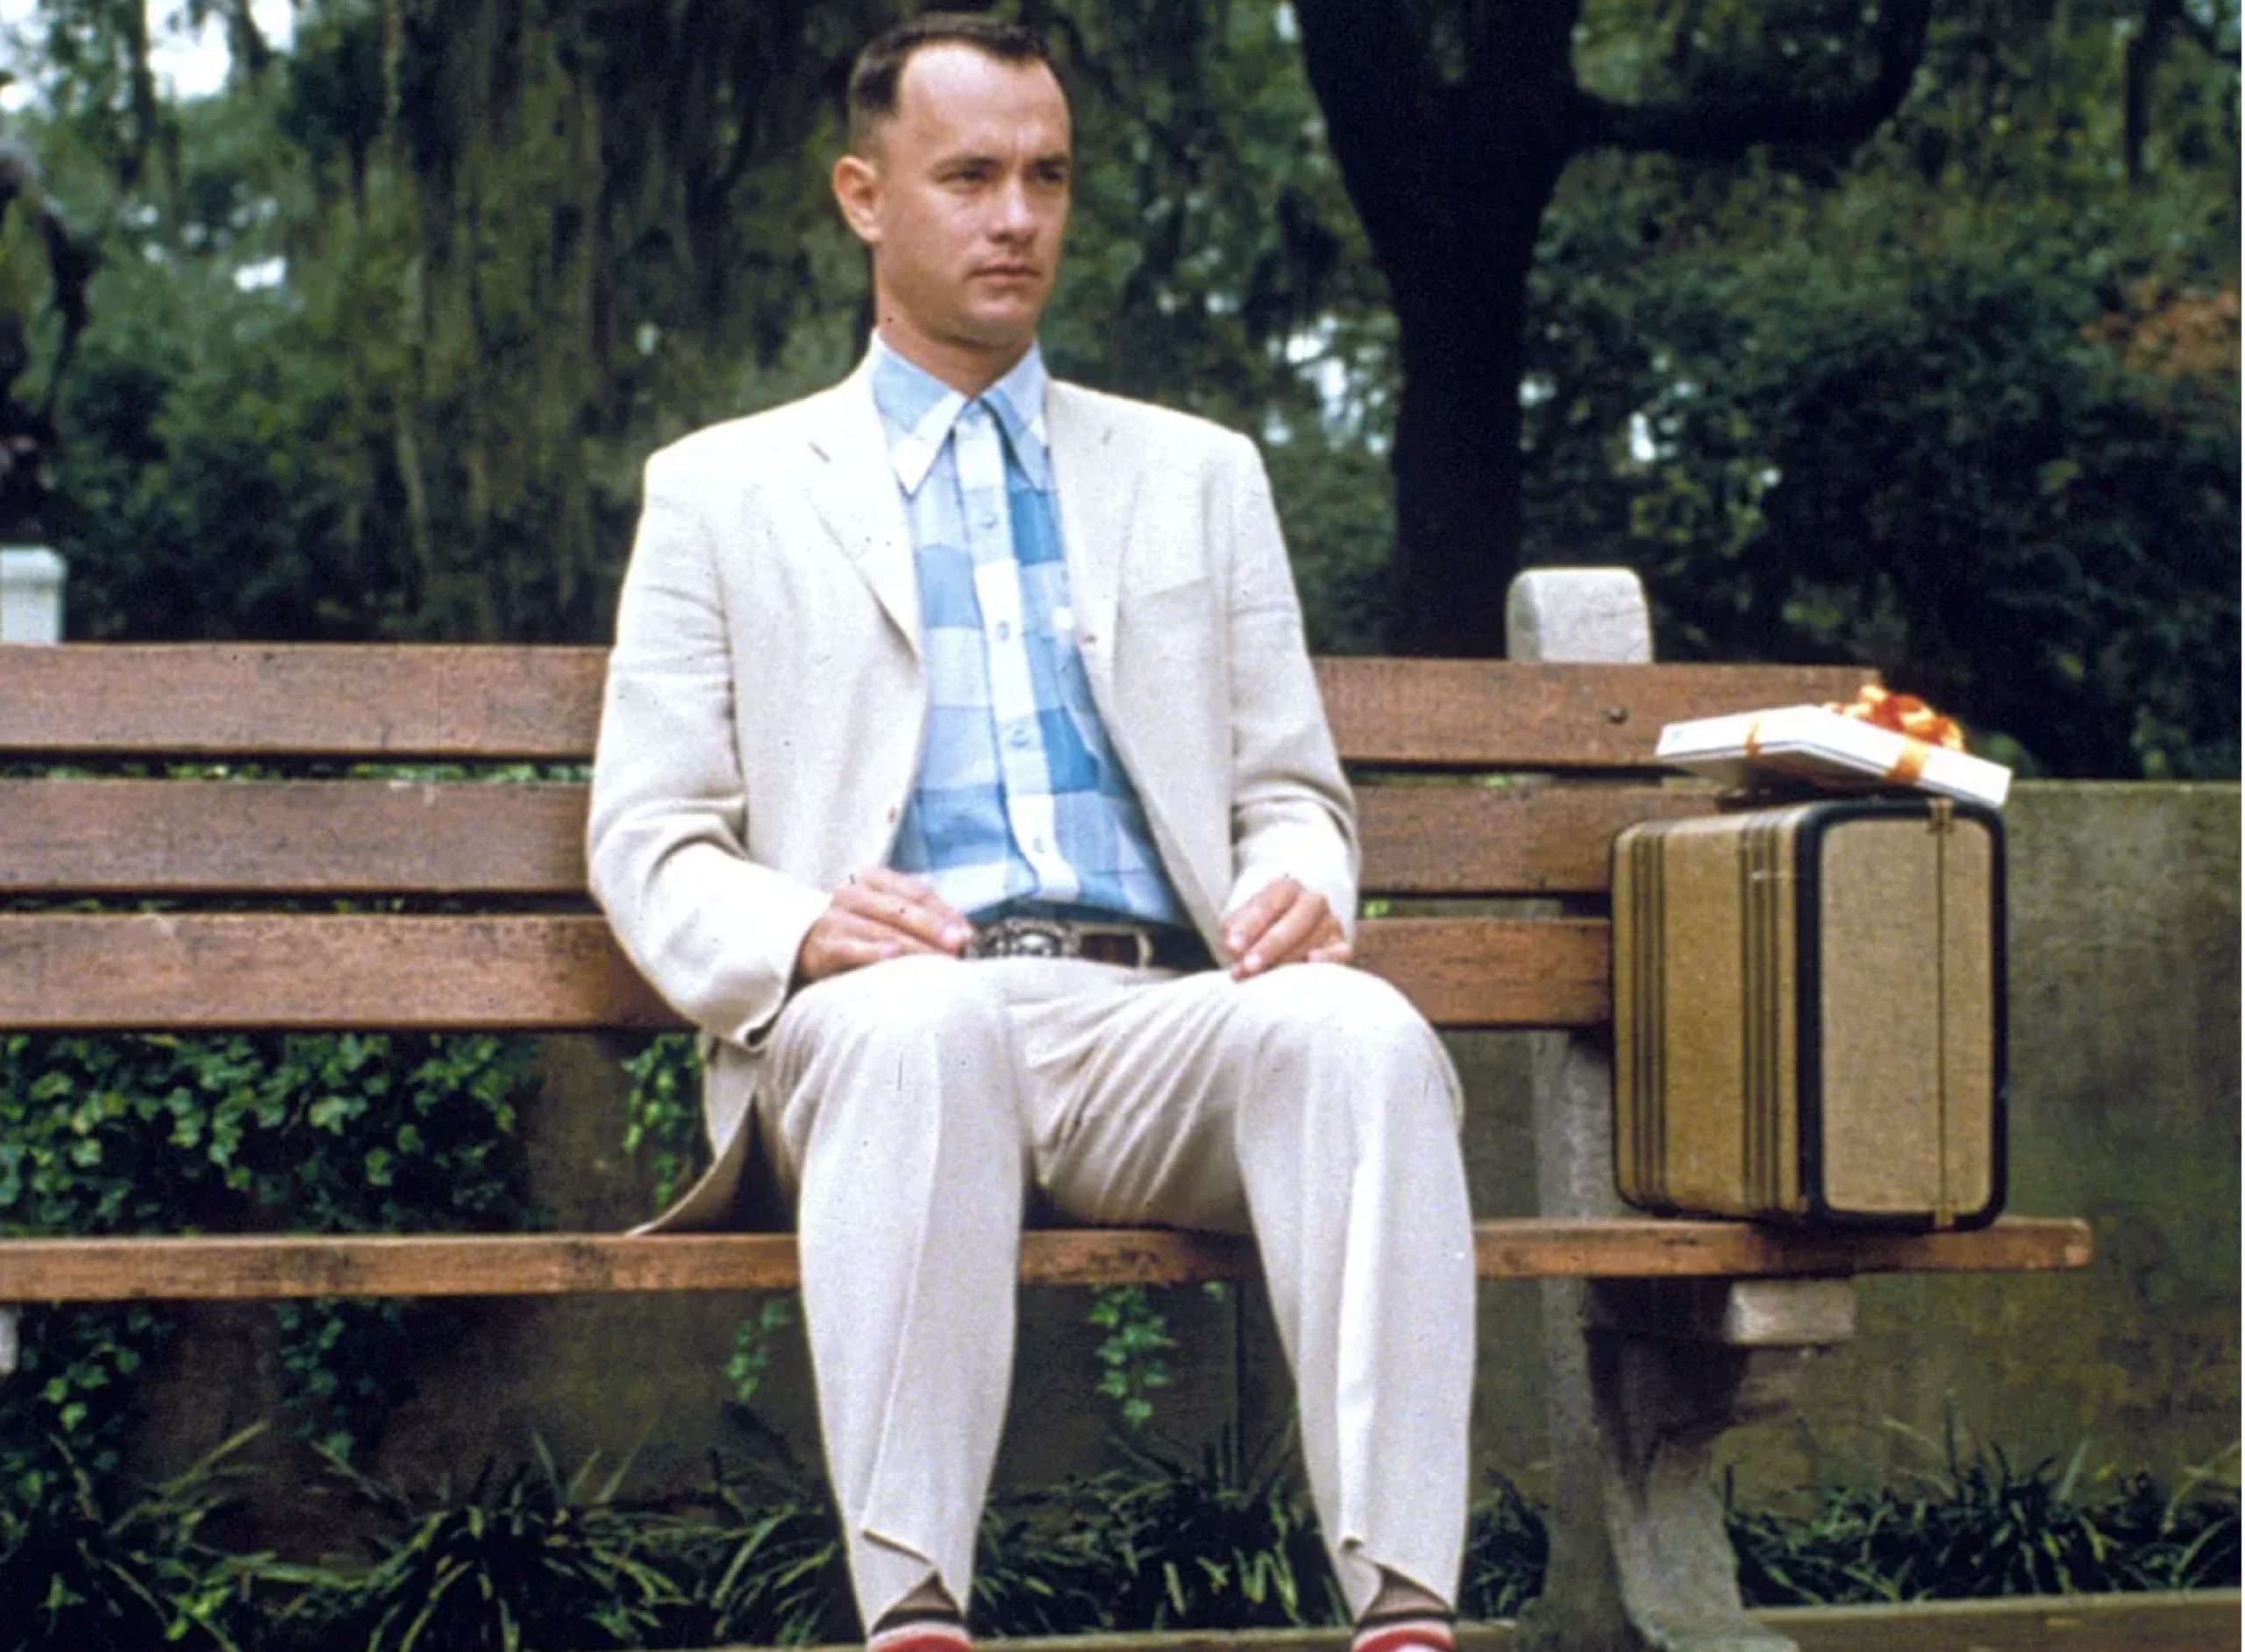 Forrest Gump Movie Review